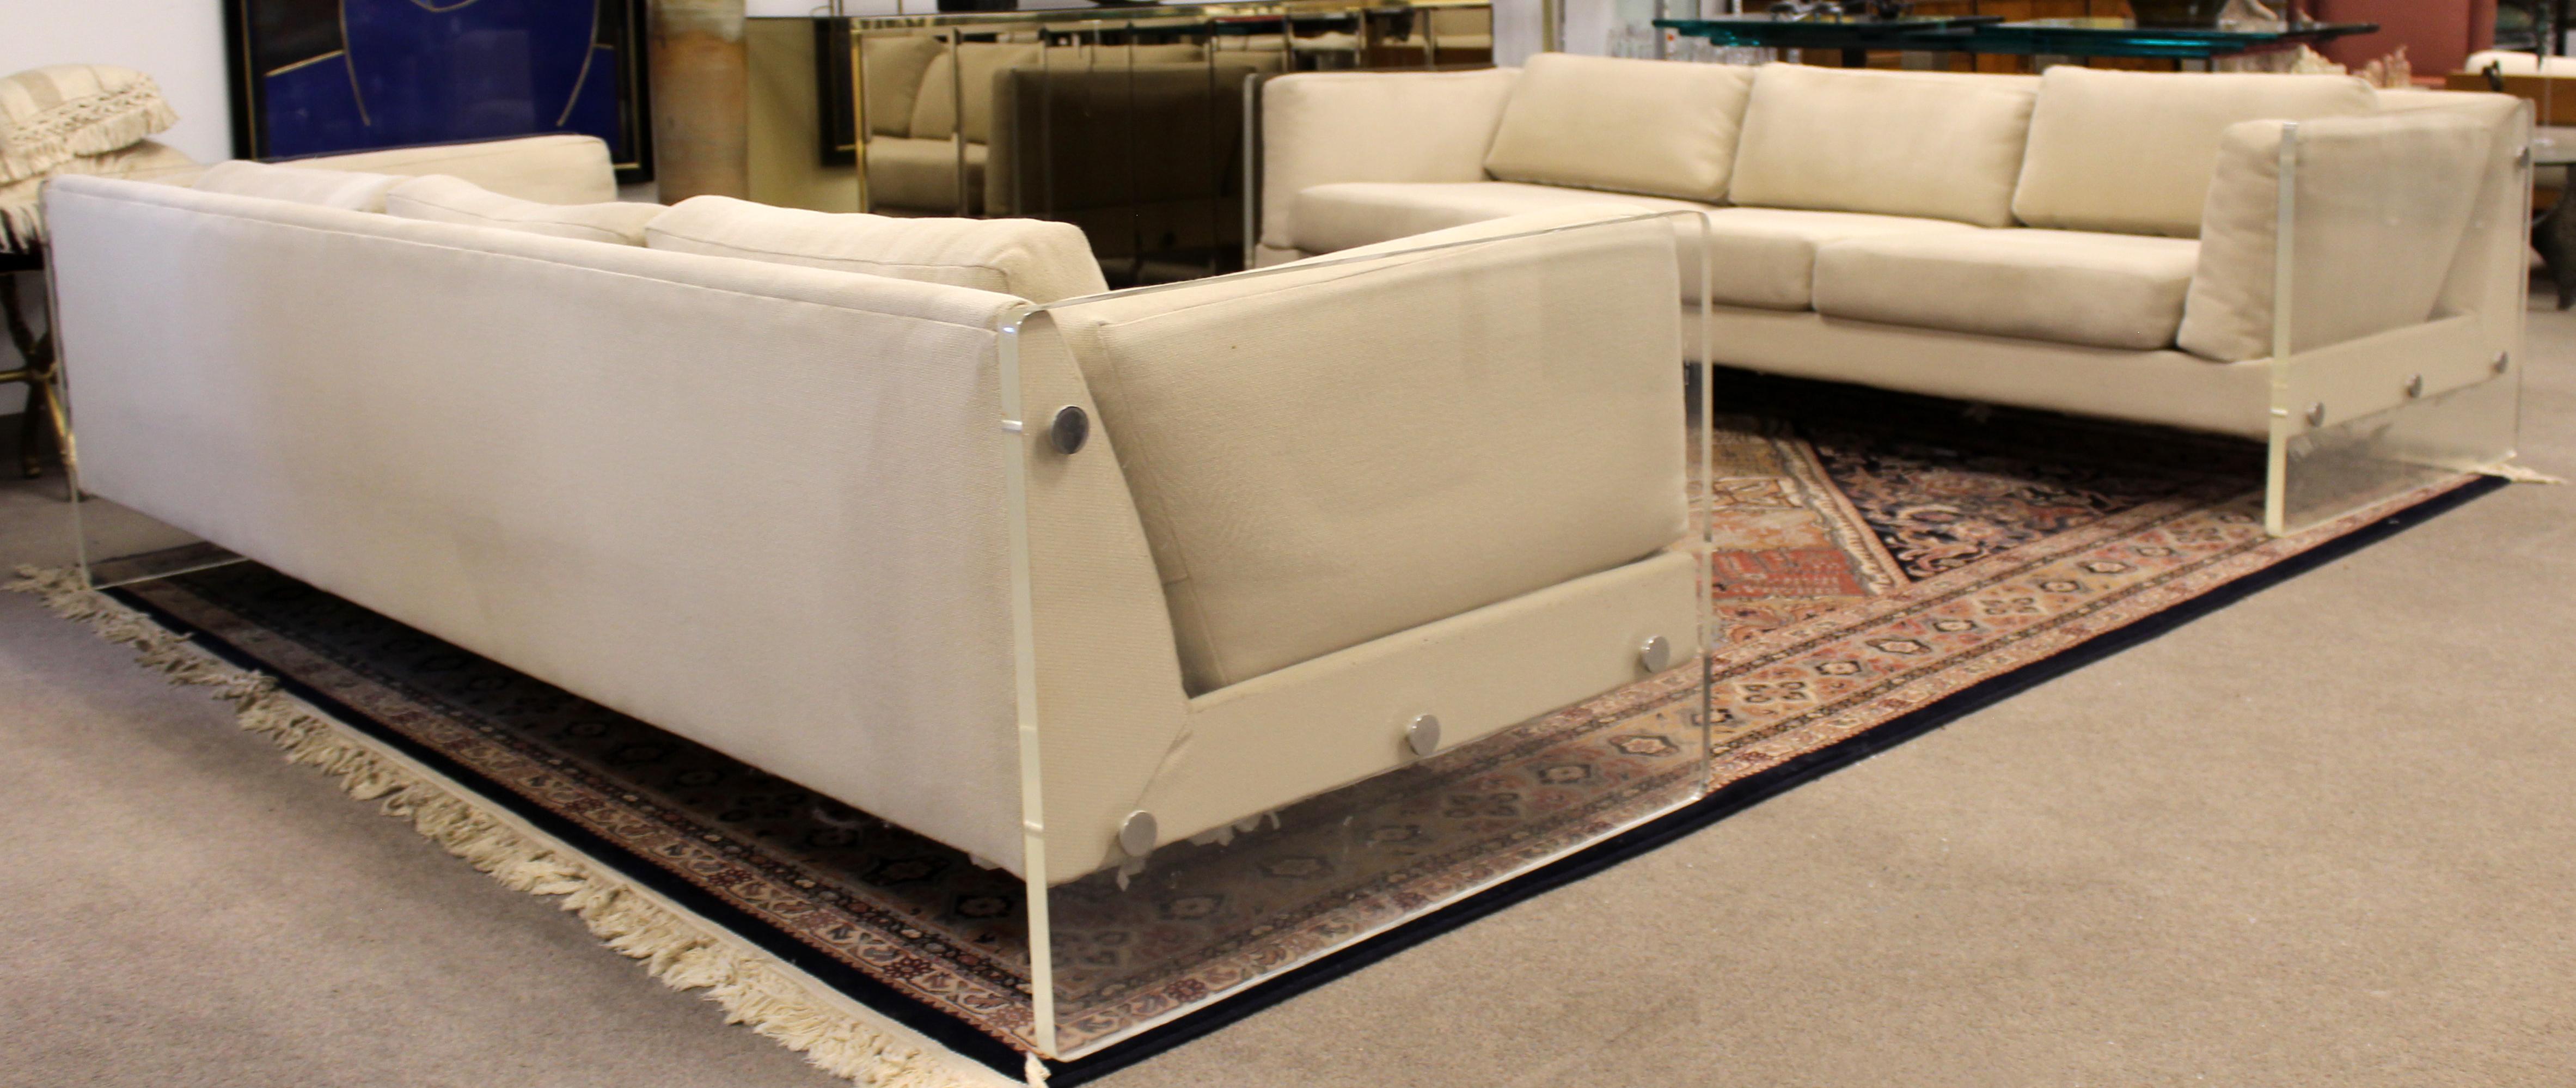 For your consideration is a pair of sensational sofas, with Lucite sides, in the Baughman, Selig style, circa 1970s . In very good vintage condition. The dimensions of each are 90.5